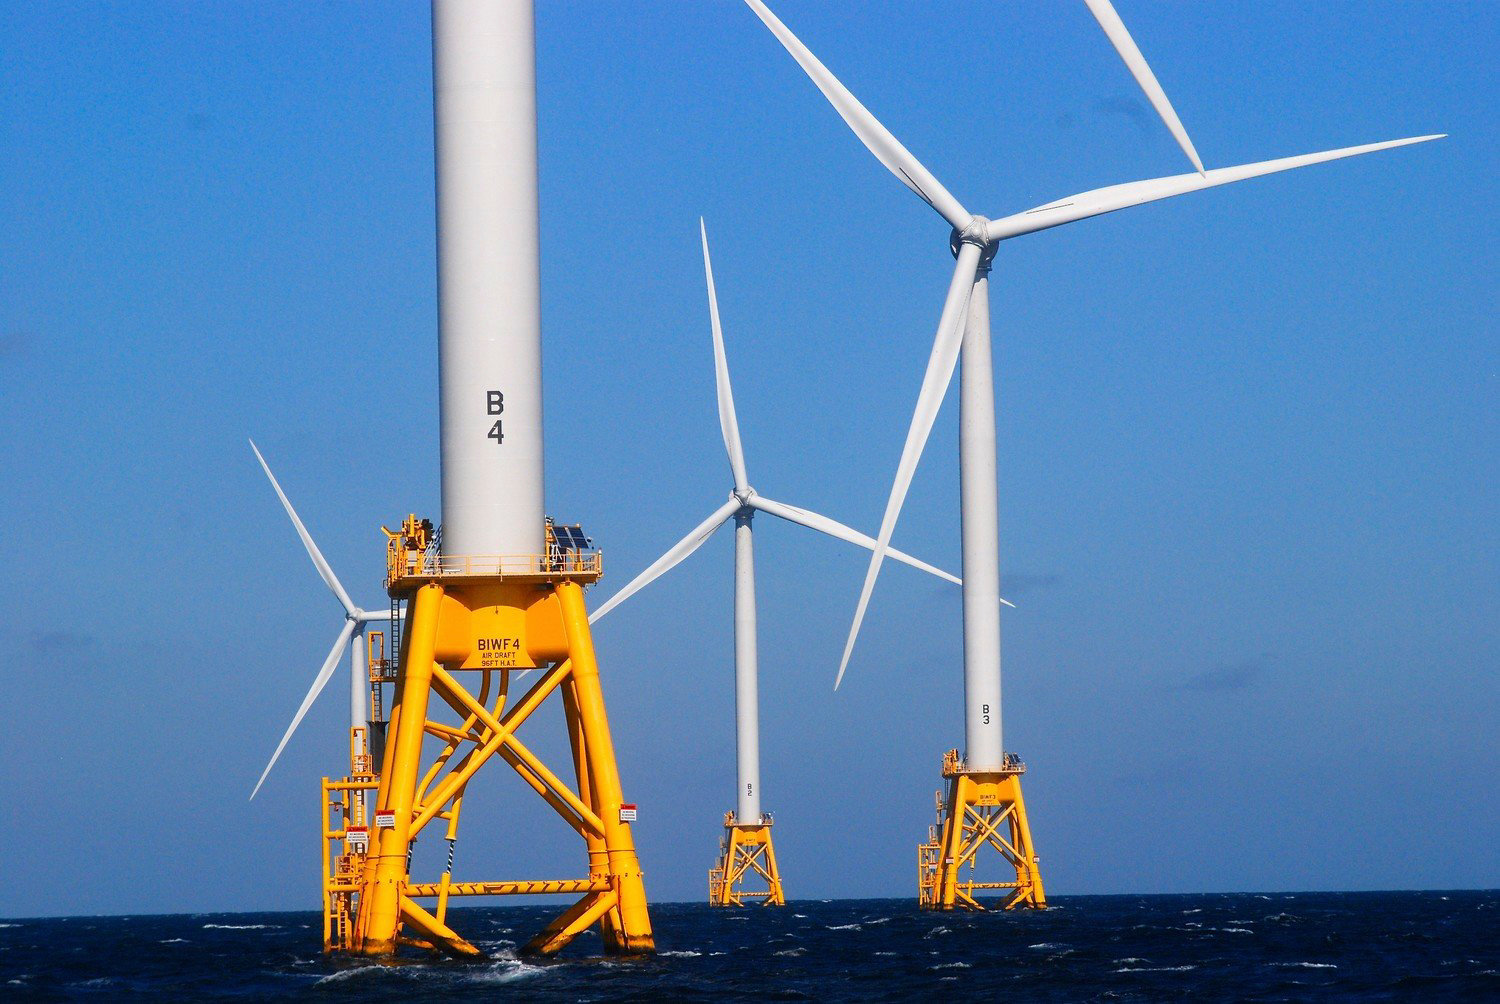 The federal government is beginning an environmental review of a proposed wind farm off Long Island’s South Shore, similar to this one.